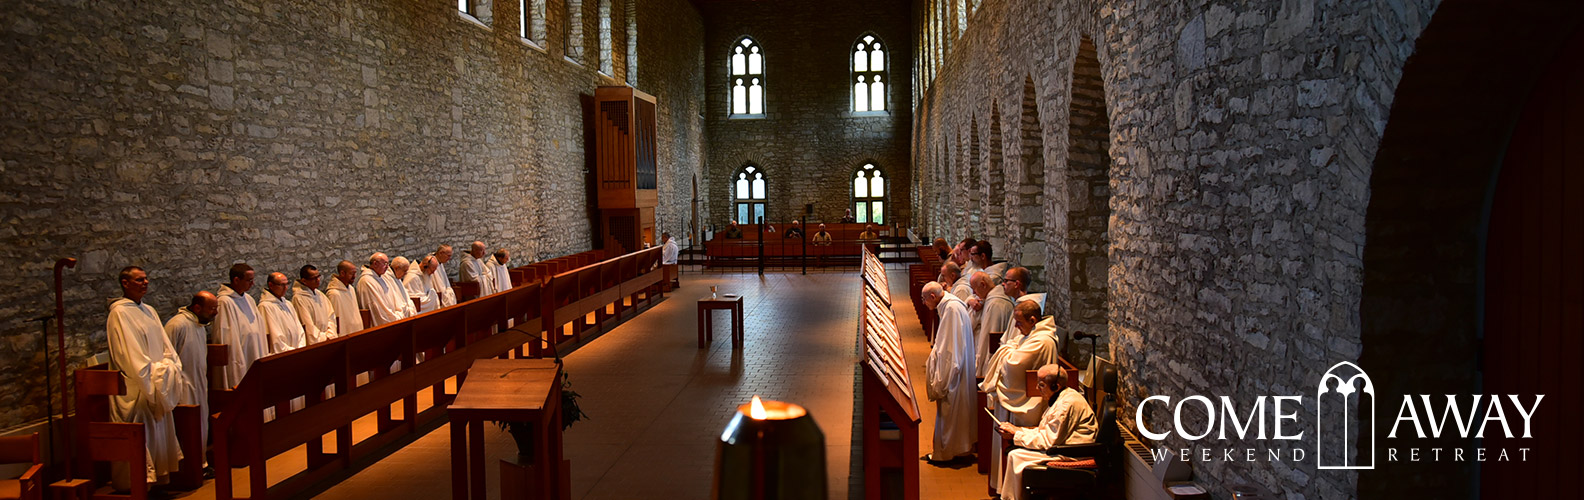 monks in choir in large stone church, text says come away weekend retreat 